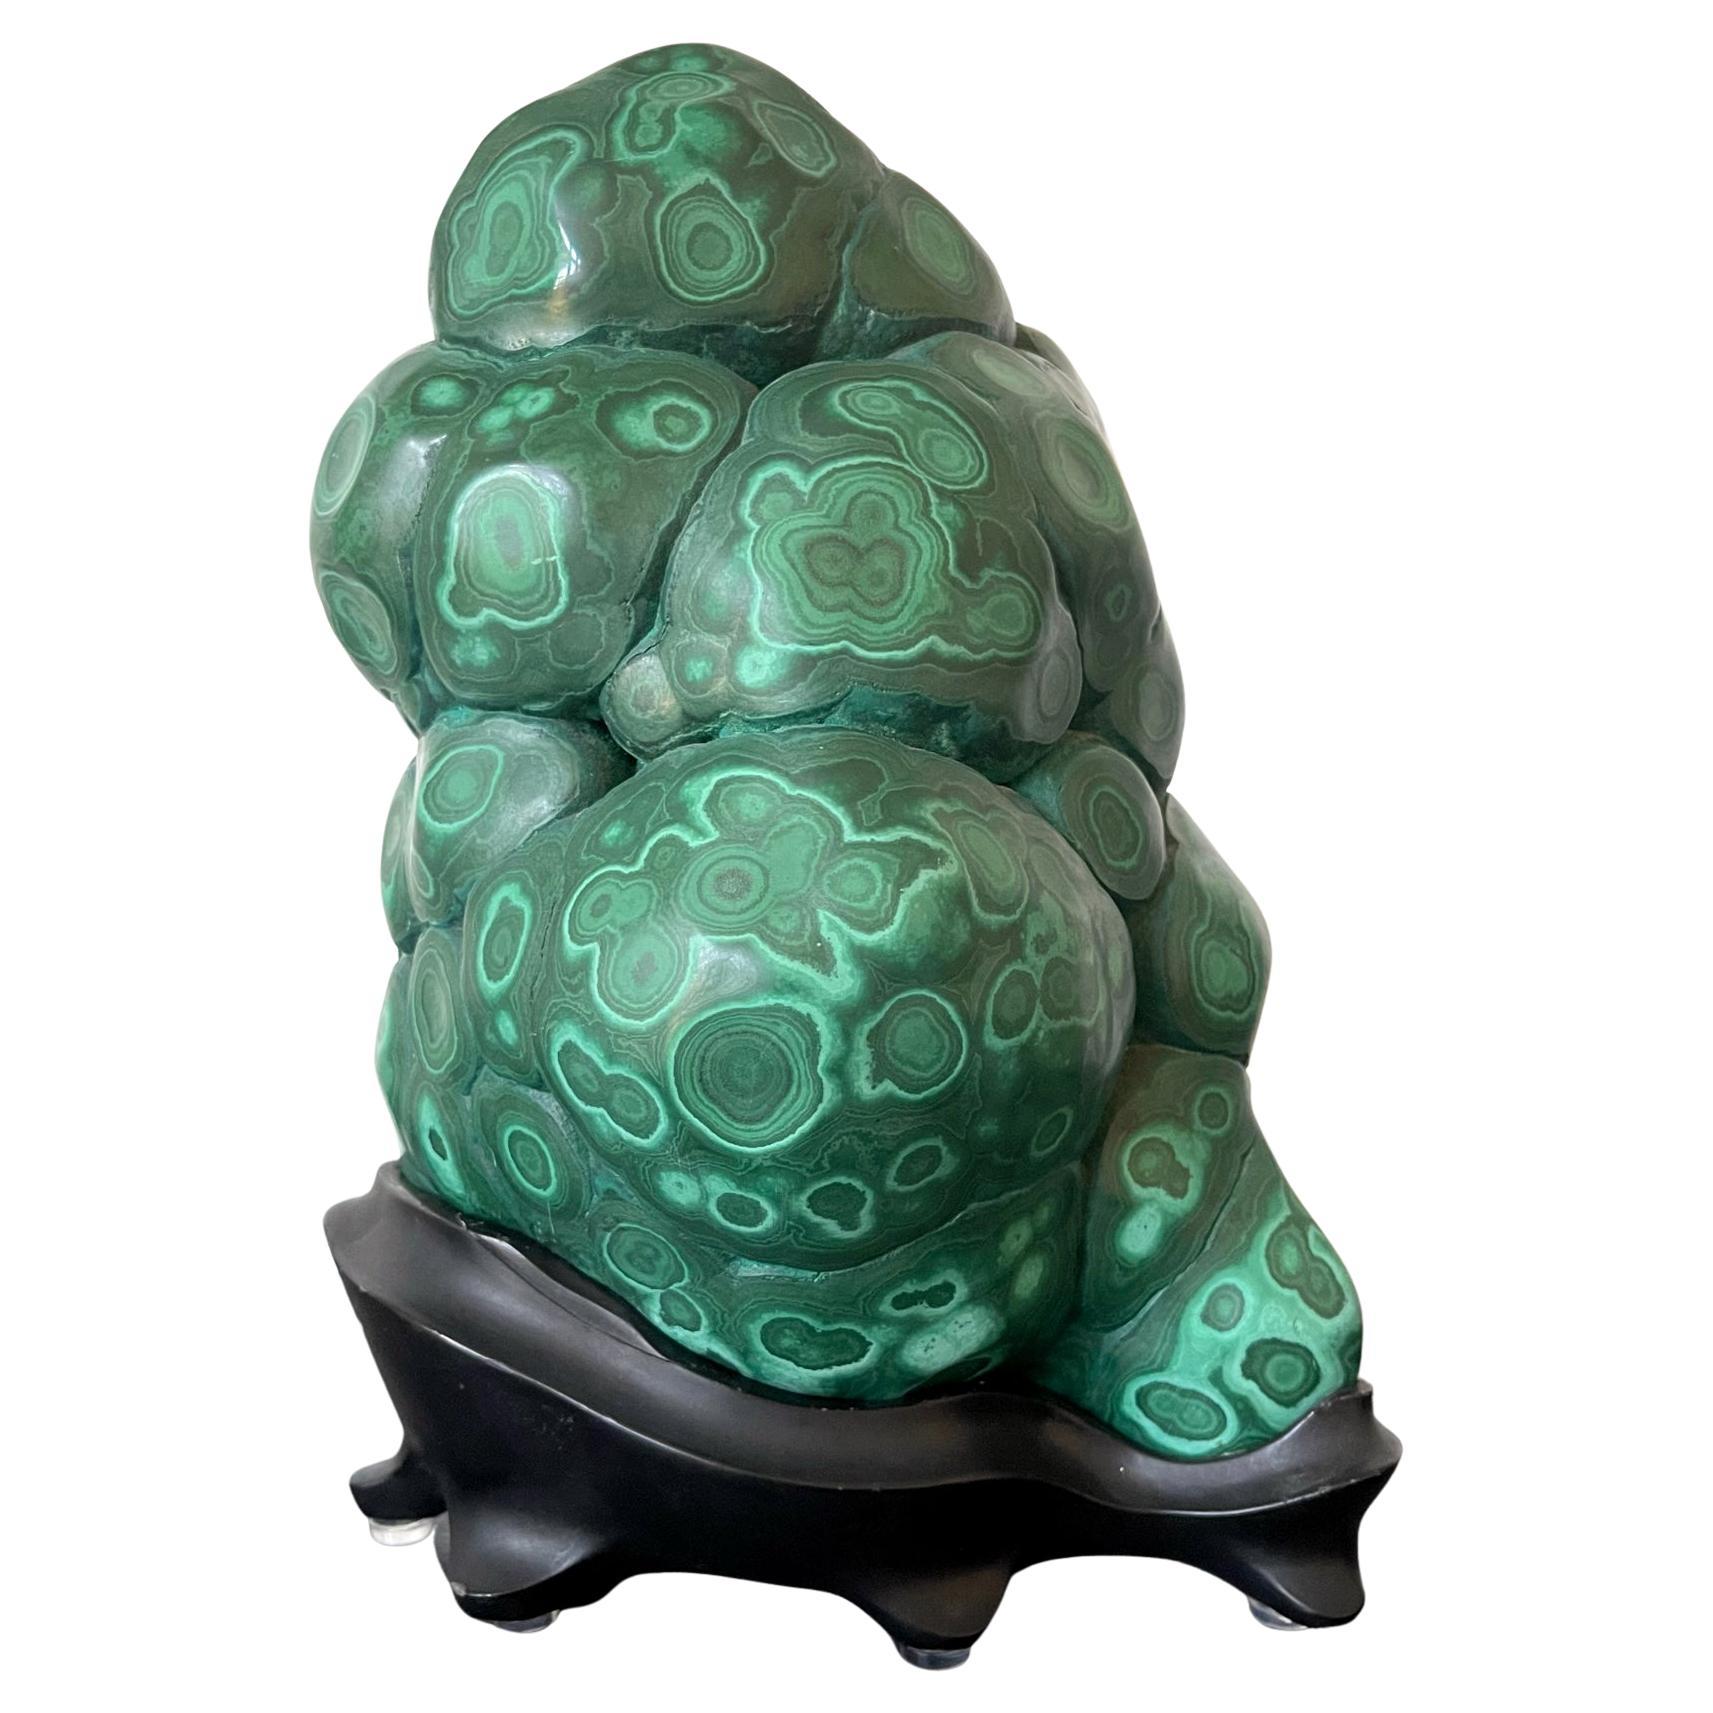 Malachite Rock on Display Stand as a Chinese Scholar Stone